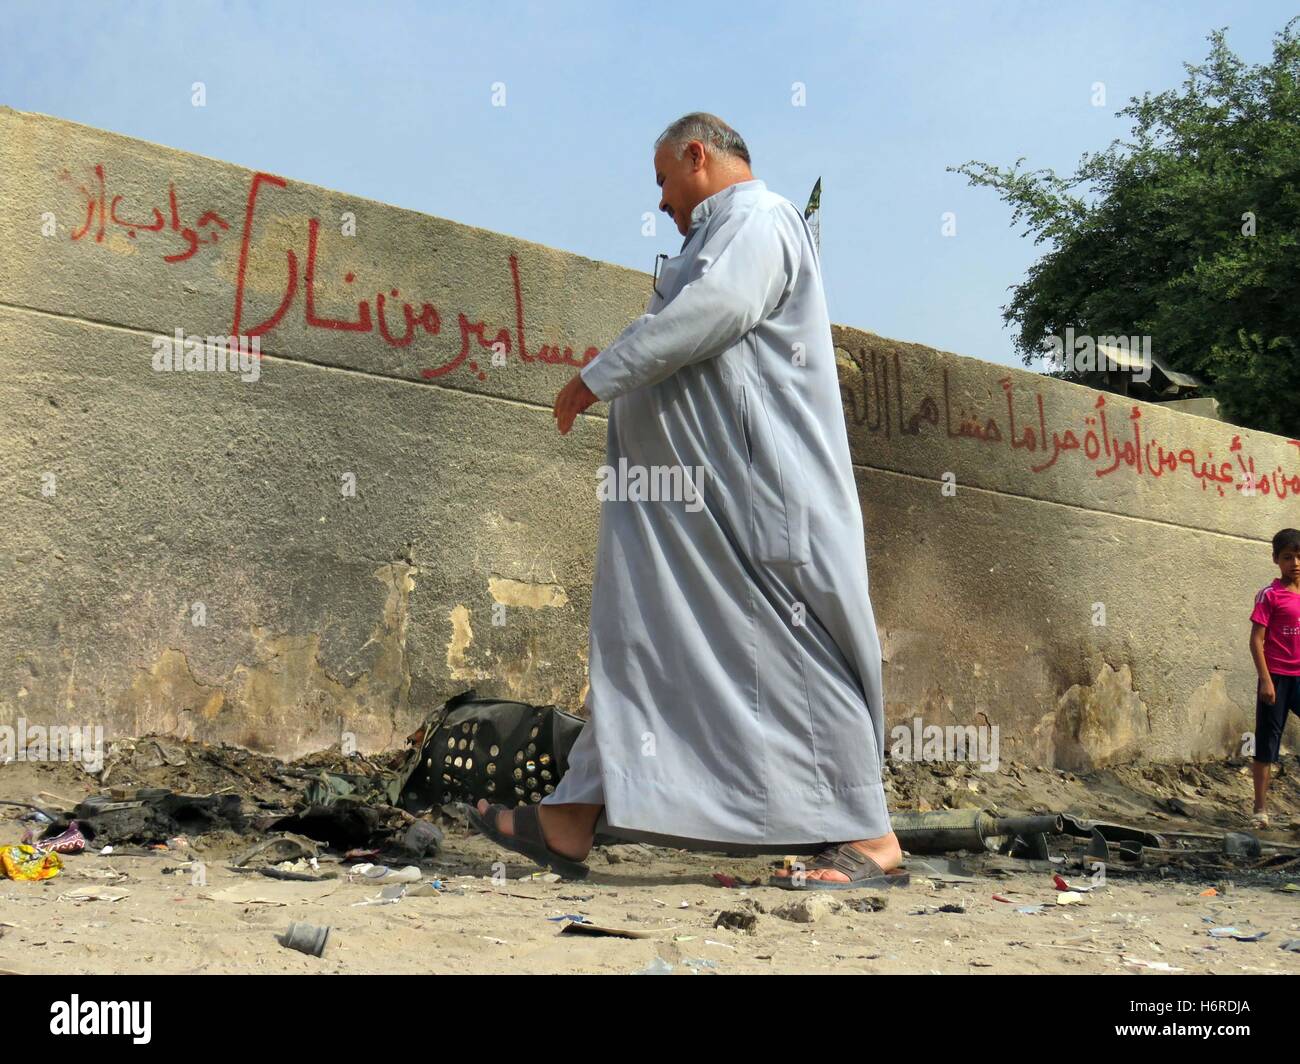 (161031) -- BAGHDAD, Oct. 31, 2016 (Xinhua) -- A man walks at the site of a bomb attack in Baghdad, Iraq, on Oct. 31, 2016. At least five people were wounded on evening Sunday in a bomb attack targeting citizen people in Hoorya district northern Baghdad, a Iraq police source said. (Xinhua/Khalil Dawood)(dtf) Stock Photo